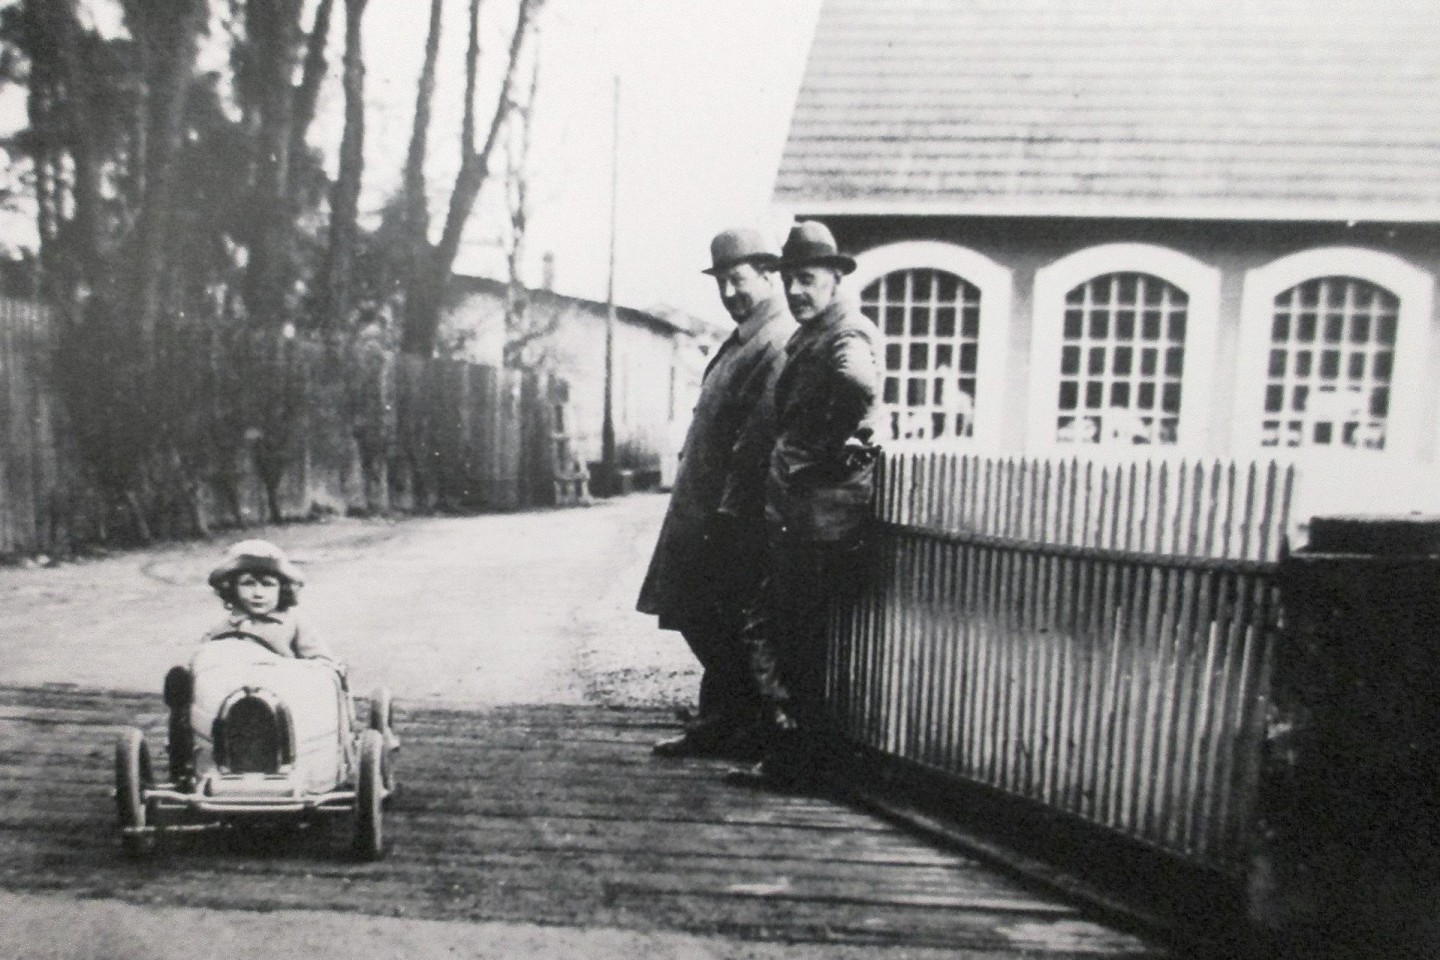 That's the original Bugatti Baby electric car being driven by Roland Bugatti with patriarch Ettore Bugatti and friend watching on - circa 1926.